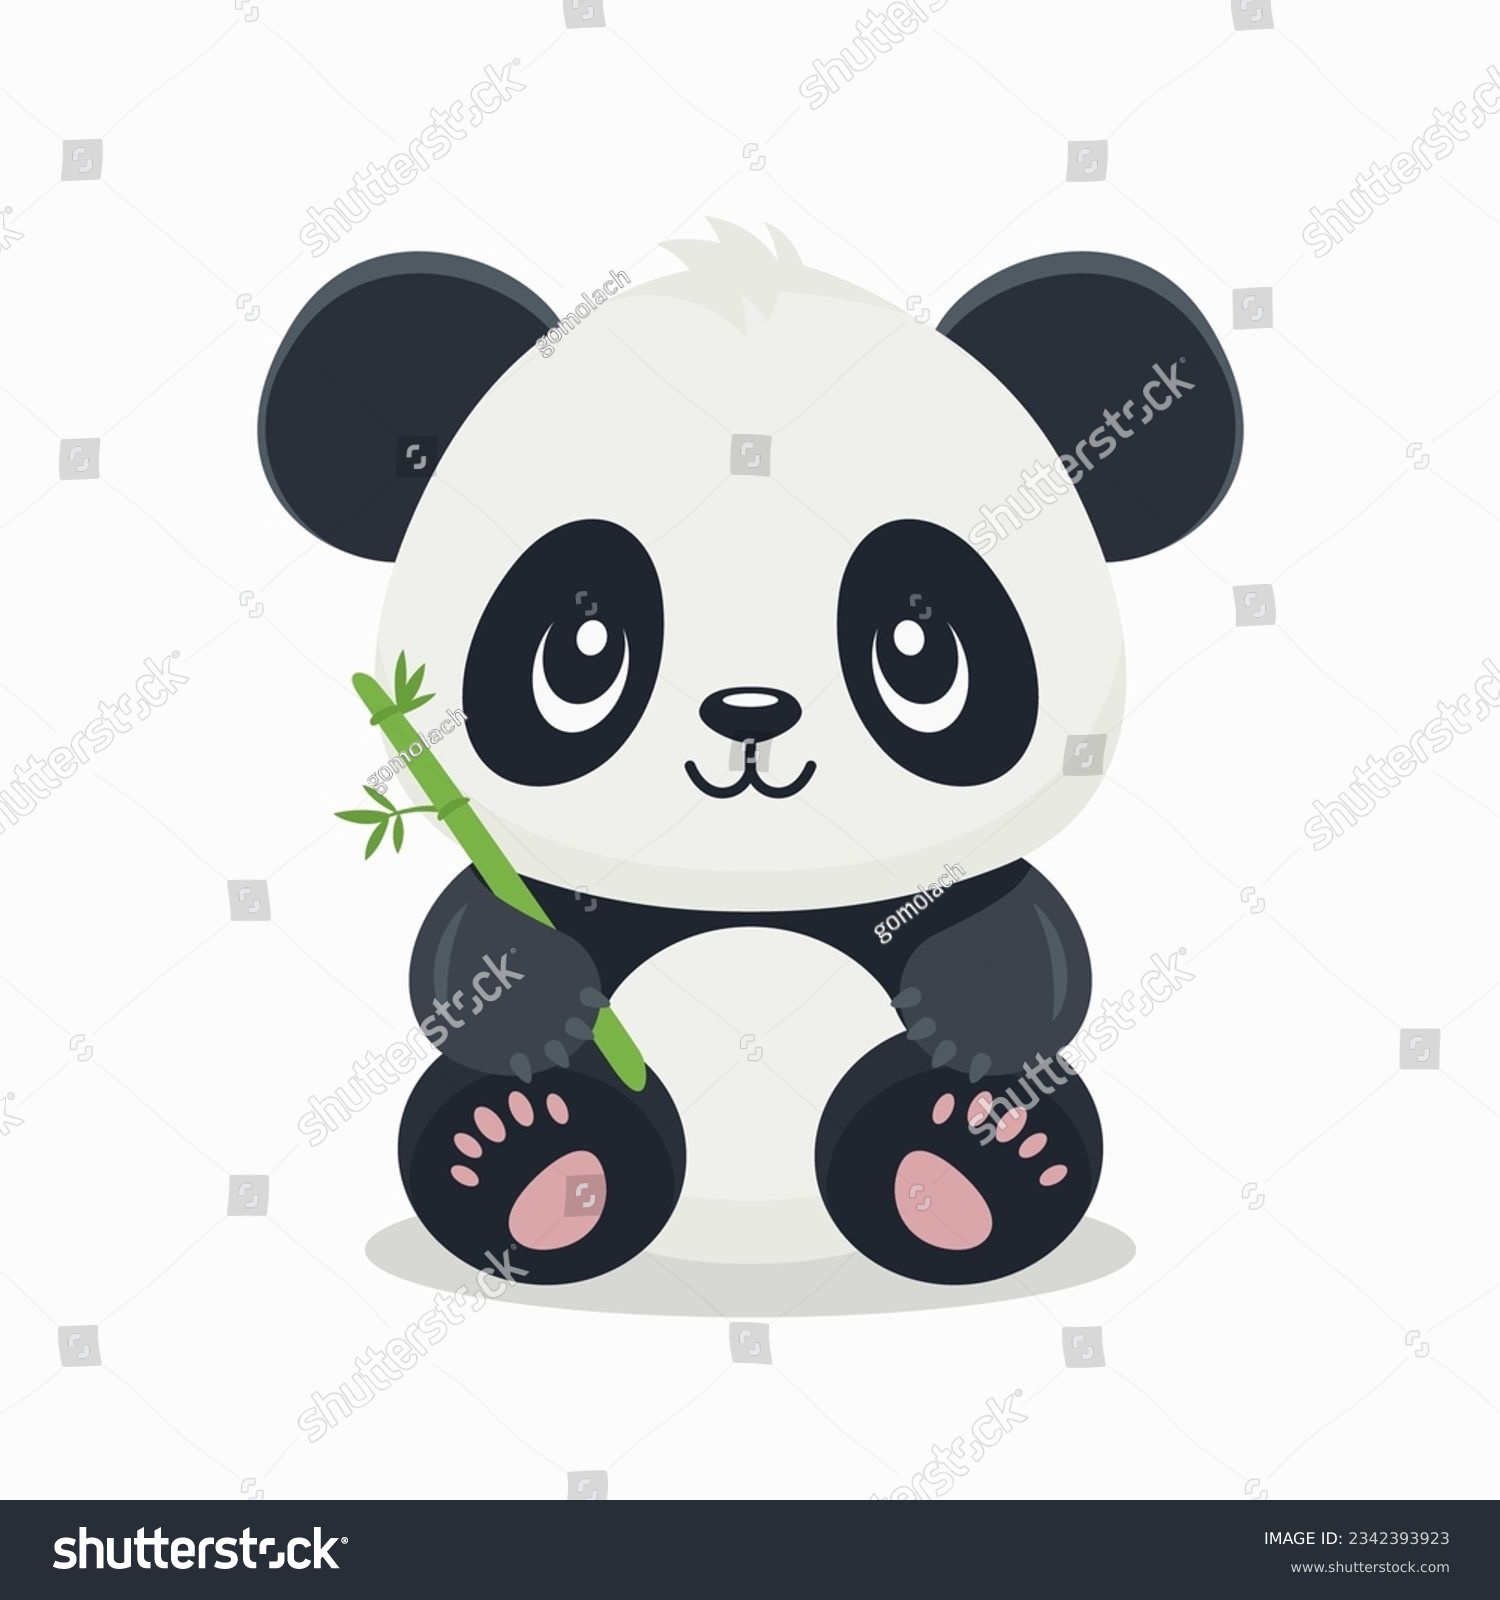 SVG of Flat Vector Cute Cartoon Panda Character with Bamboo. Funny Smiling Sitting Panda Bear in Front View svg